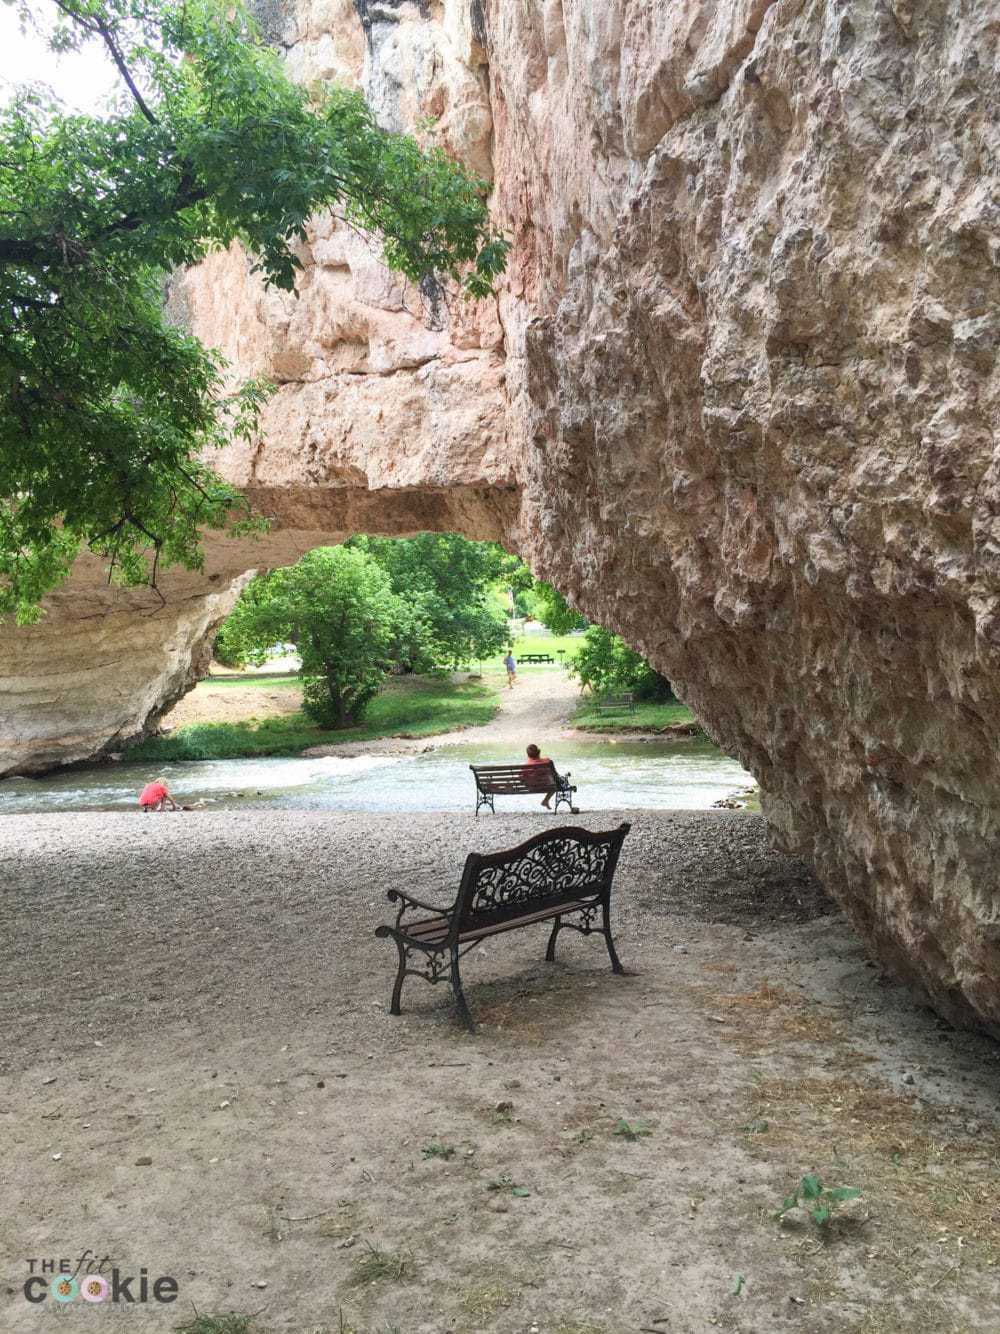 Explore the natural beauty of Wyoming and visit Ayres Bridge outside of Douglas, it's a fun place to explore and have a picnic! - @TheFitCookie #travel #Wyoming #explore